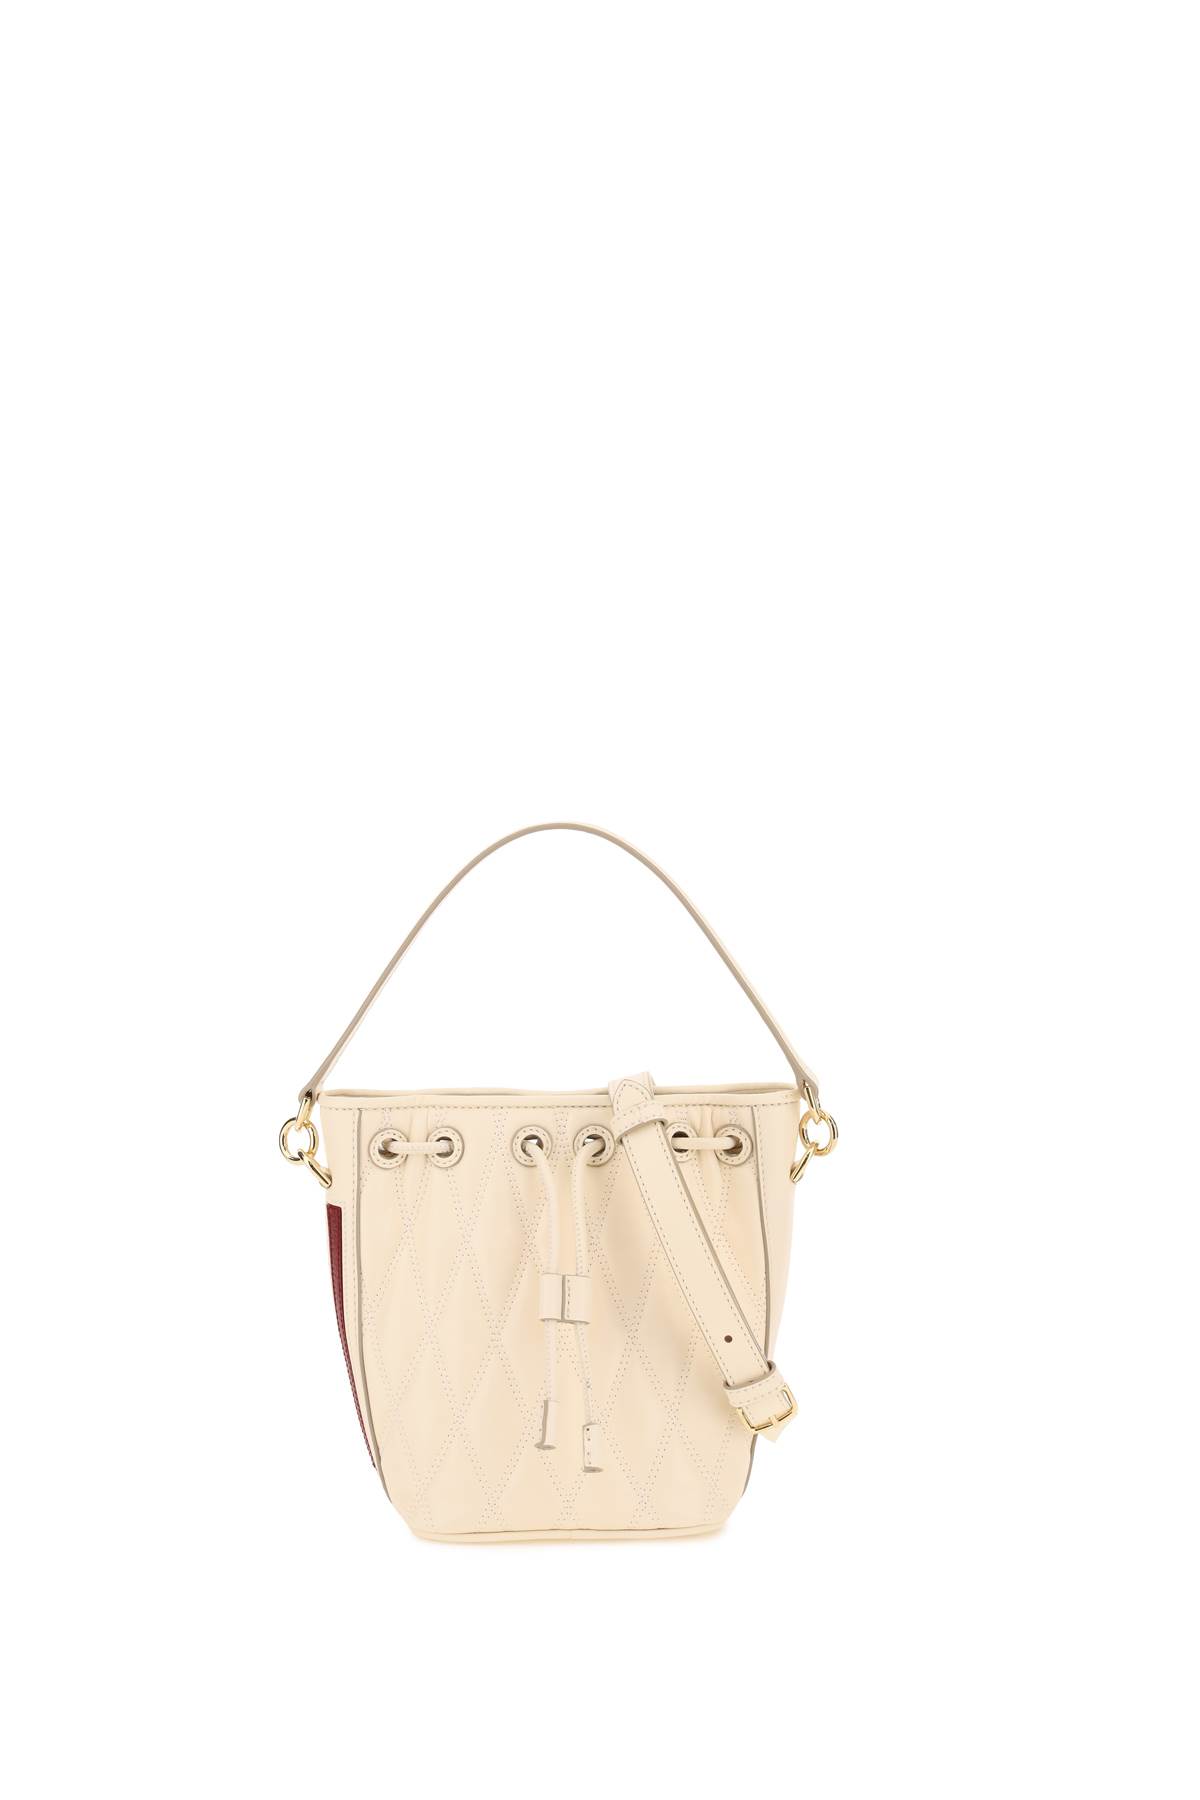 Bally donae Quilted Nappa Bucket Bag